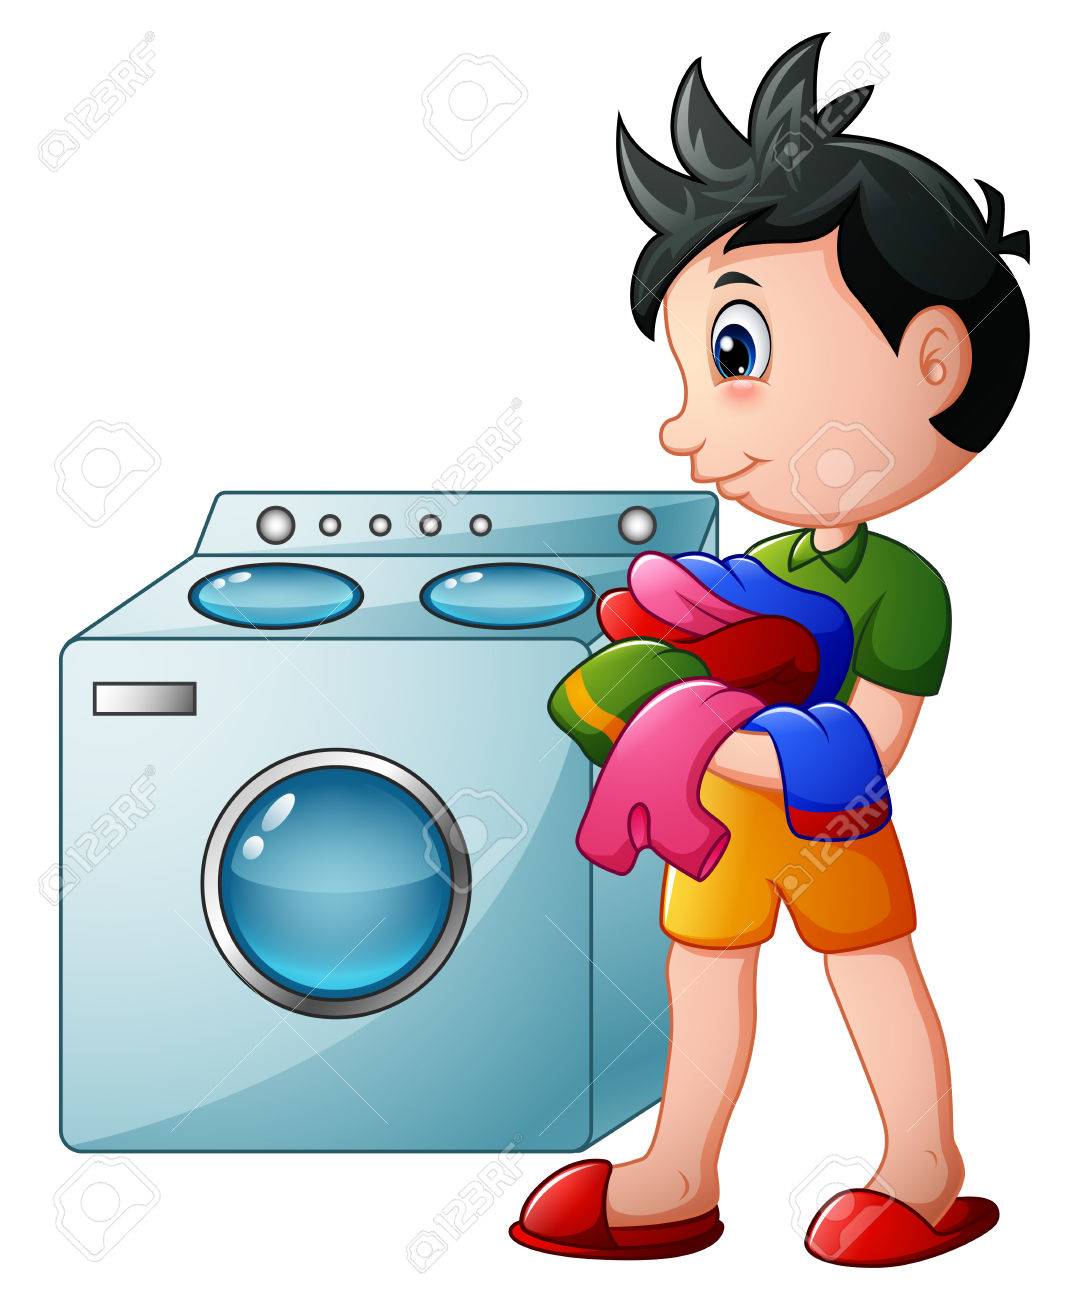 1,787 Clothes Dryer Stock Illustrations, Cliparts And Royalty Free.